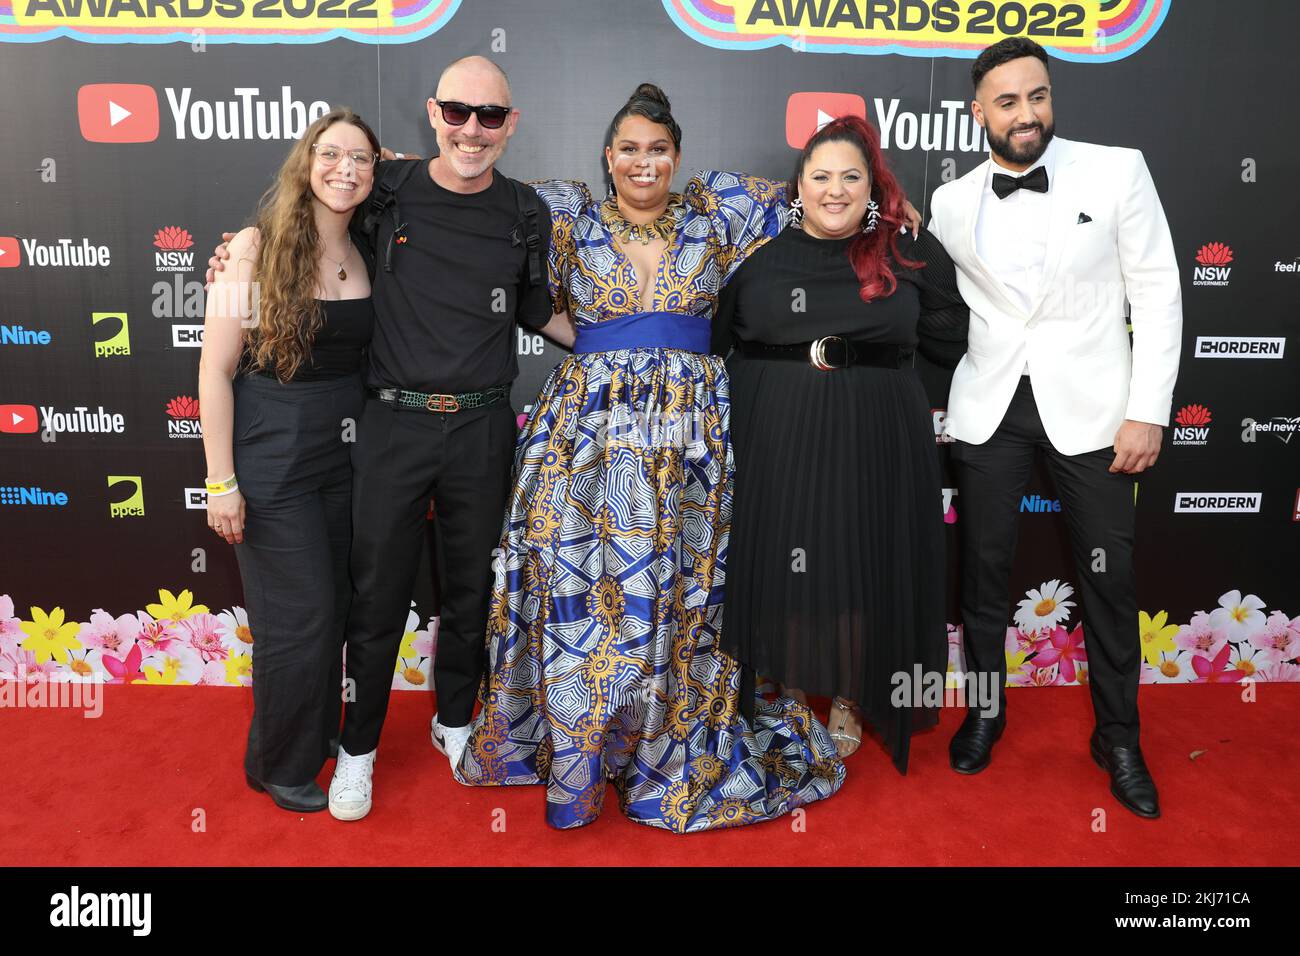 November 24, 2022: BARKAA (C) and MATTY MILLS (R) walking the red carpet at the 36th Annual ARIA Awards at The Hordern Pavilion on November 24, 2022 in Sydney, NSW Australia  (Credit Image: © Christopher Khoury/Australian Press Agency via ZUMA  Wire) Stock Photo